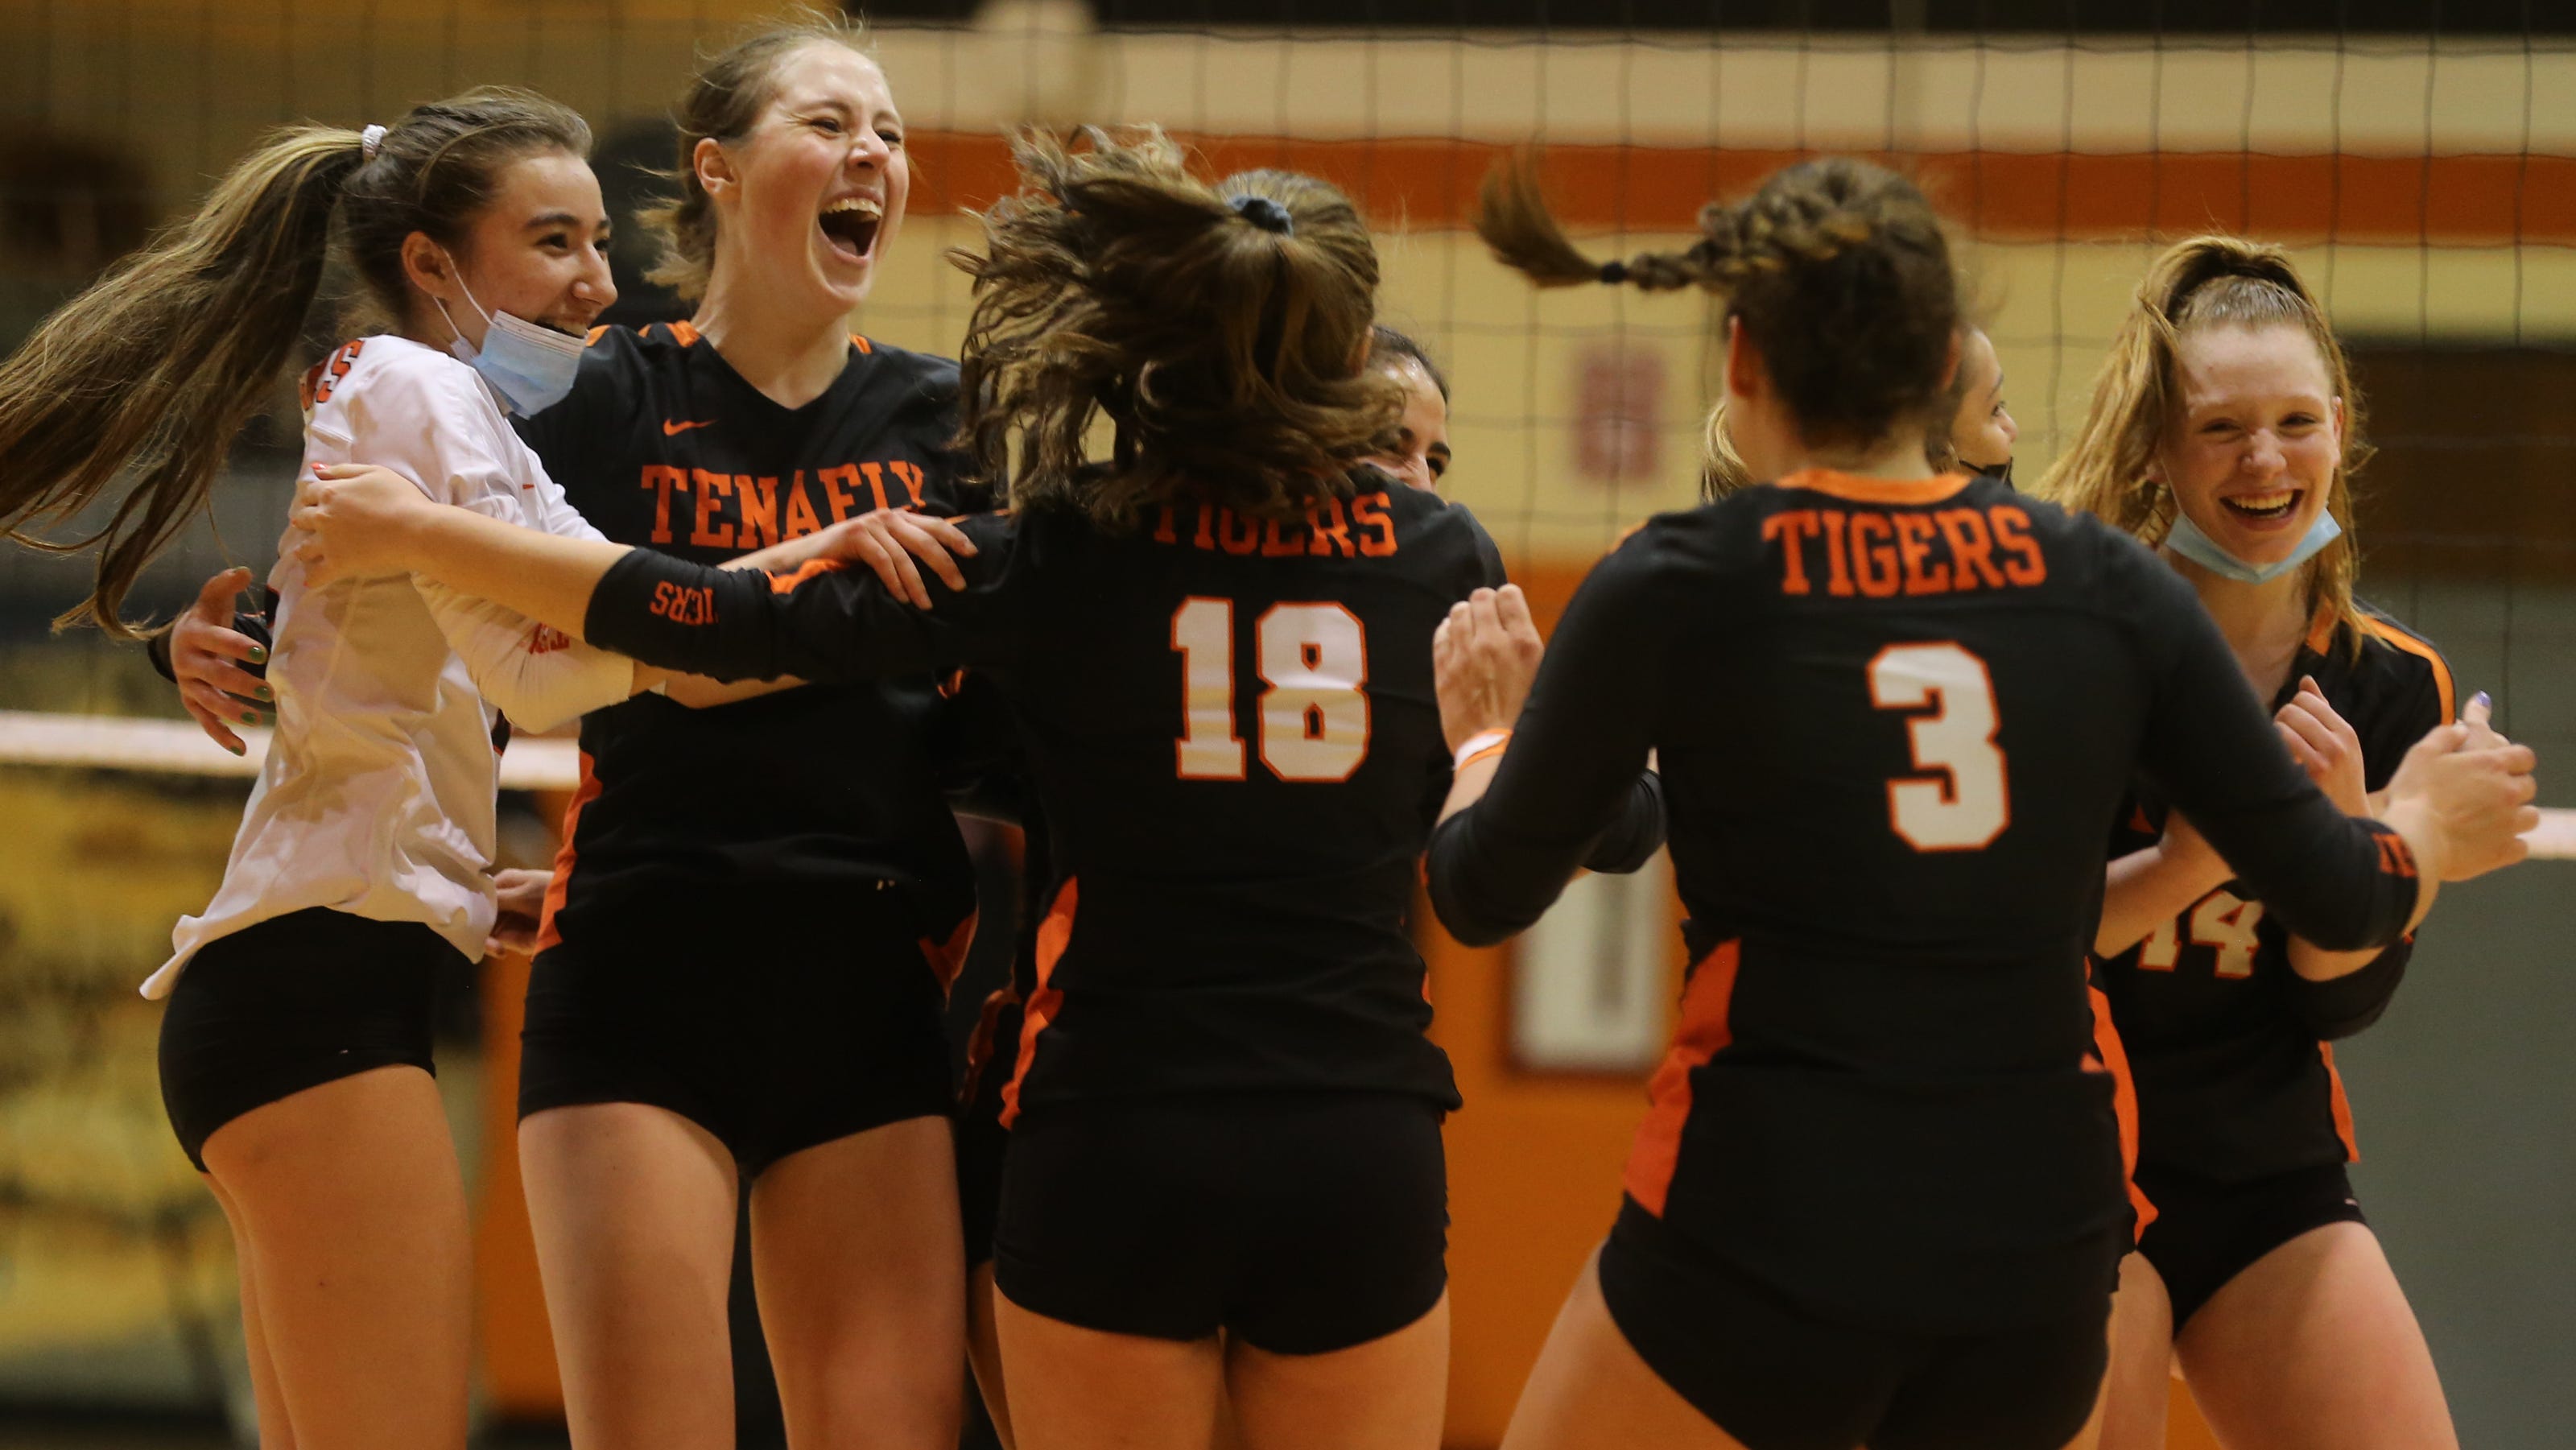 Tenafly Nj Girls Volleyball Bests Top Seed To Win Sectional Title